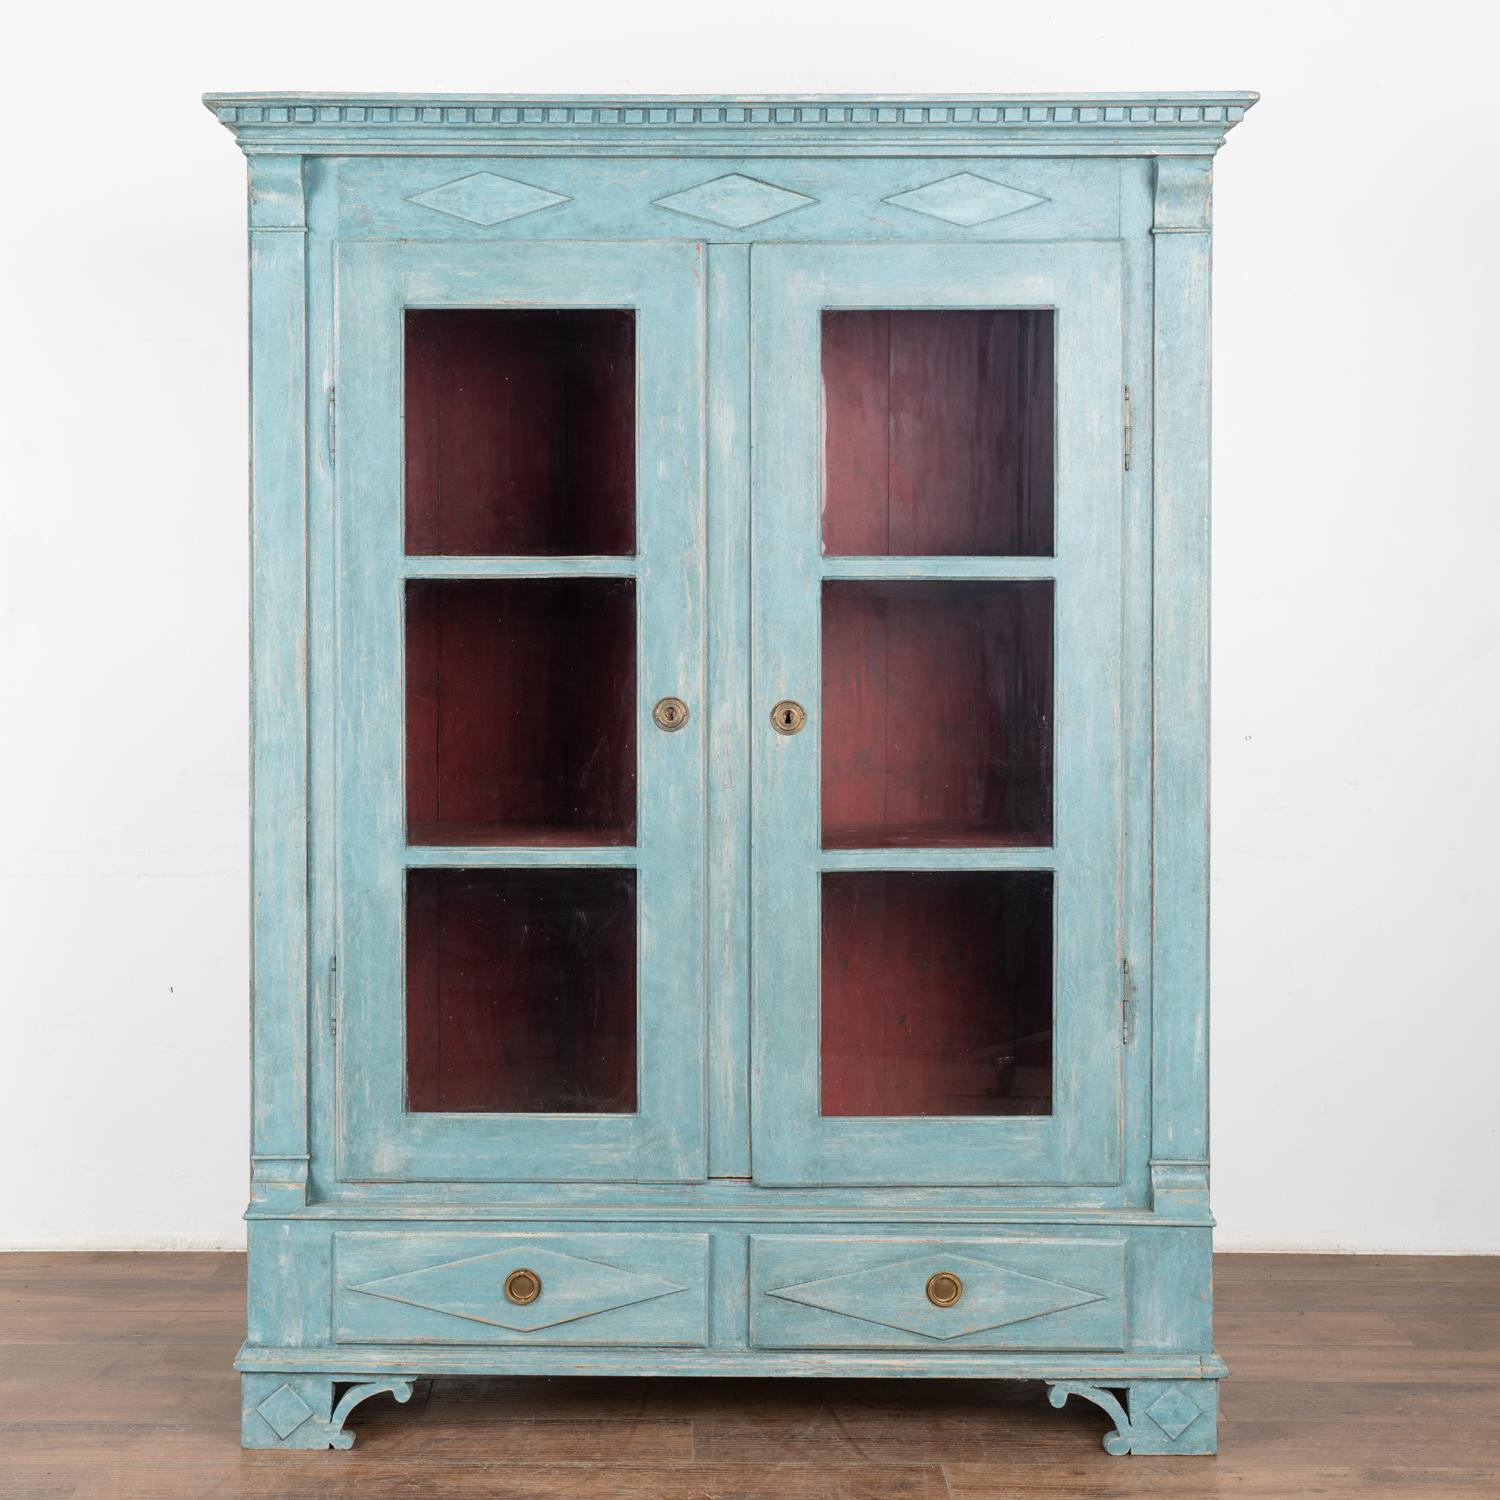 Danish Blue Painted Bookcase Display Cabinet with Glass Doors, Denmark circa 1840 For Sale